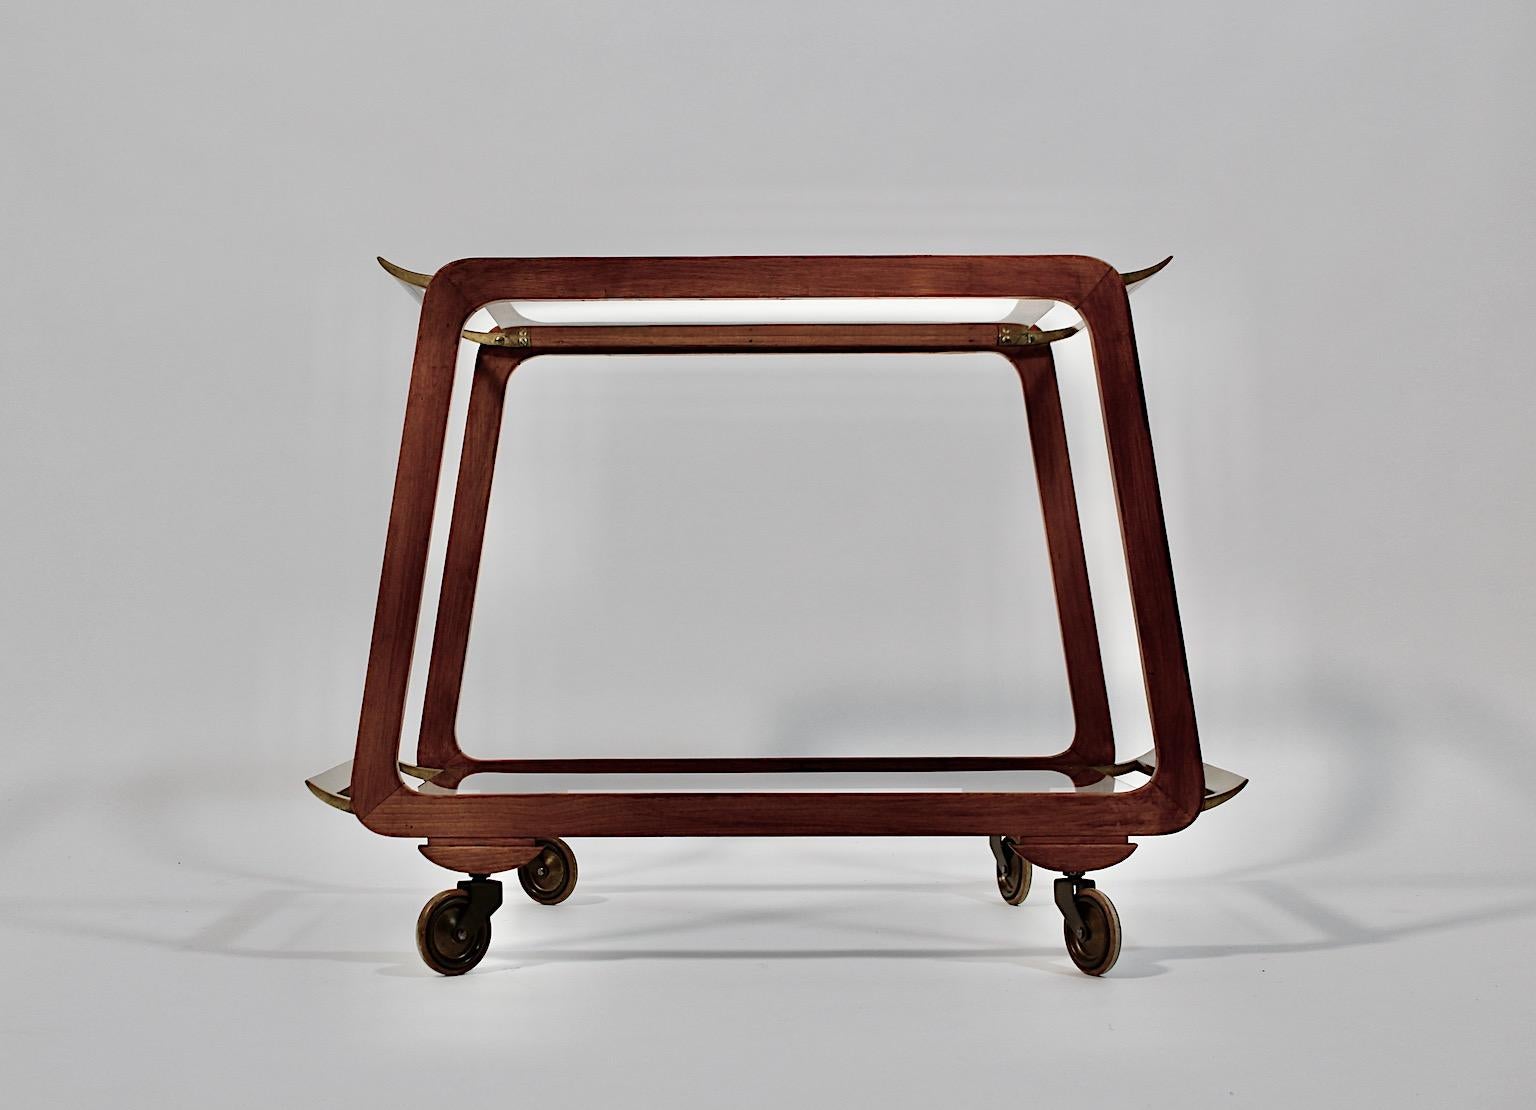 Modernist Mid century Modern vintage bar cart or tea cart from brass
and ash attributed to Oswald Haerdtl 1960s Vienna.
An amazing bar cart from beautiful brass and ash wood in warm brown color with two removable clear glass plates in rectangular